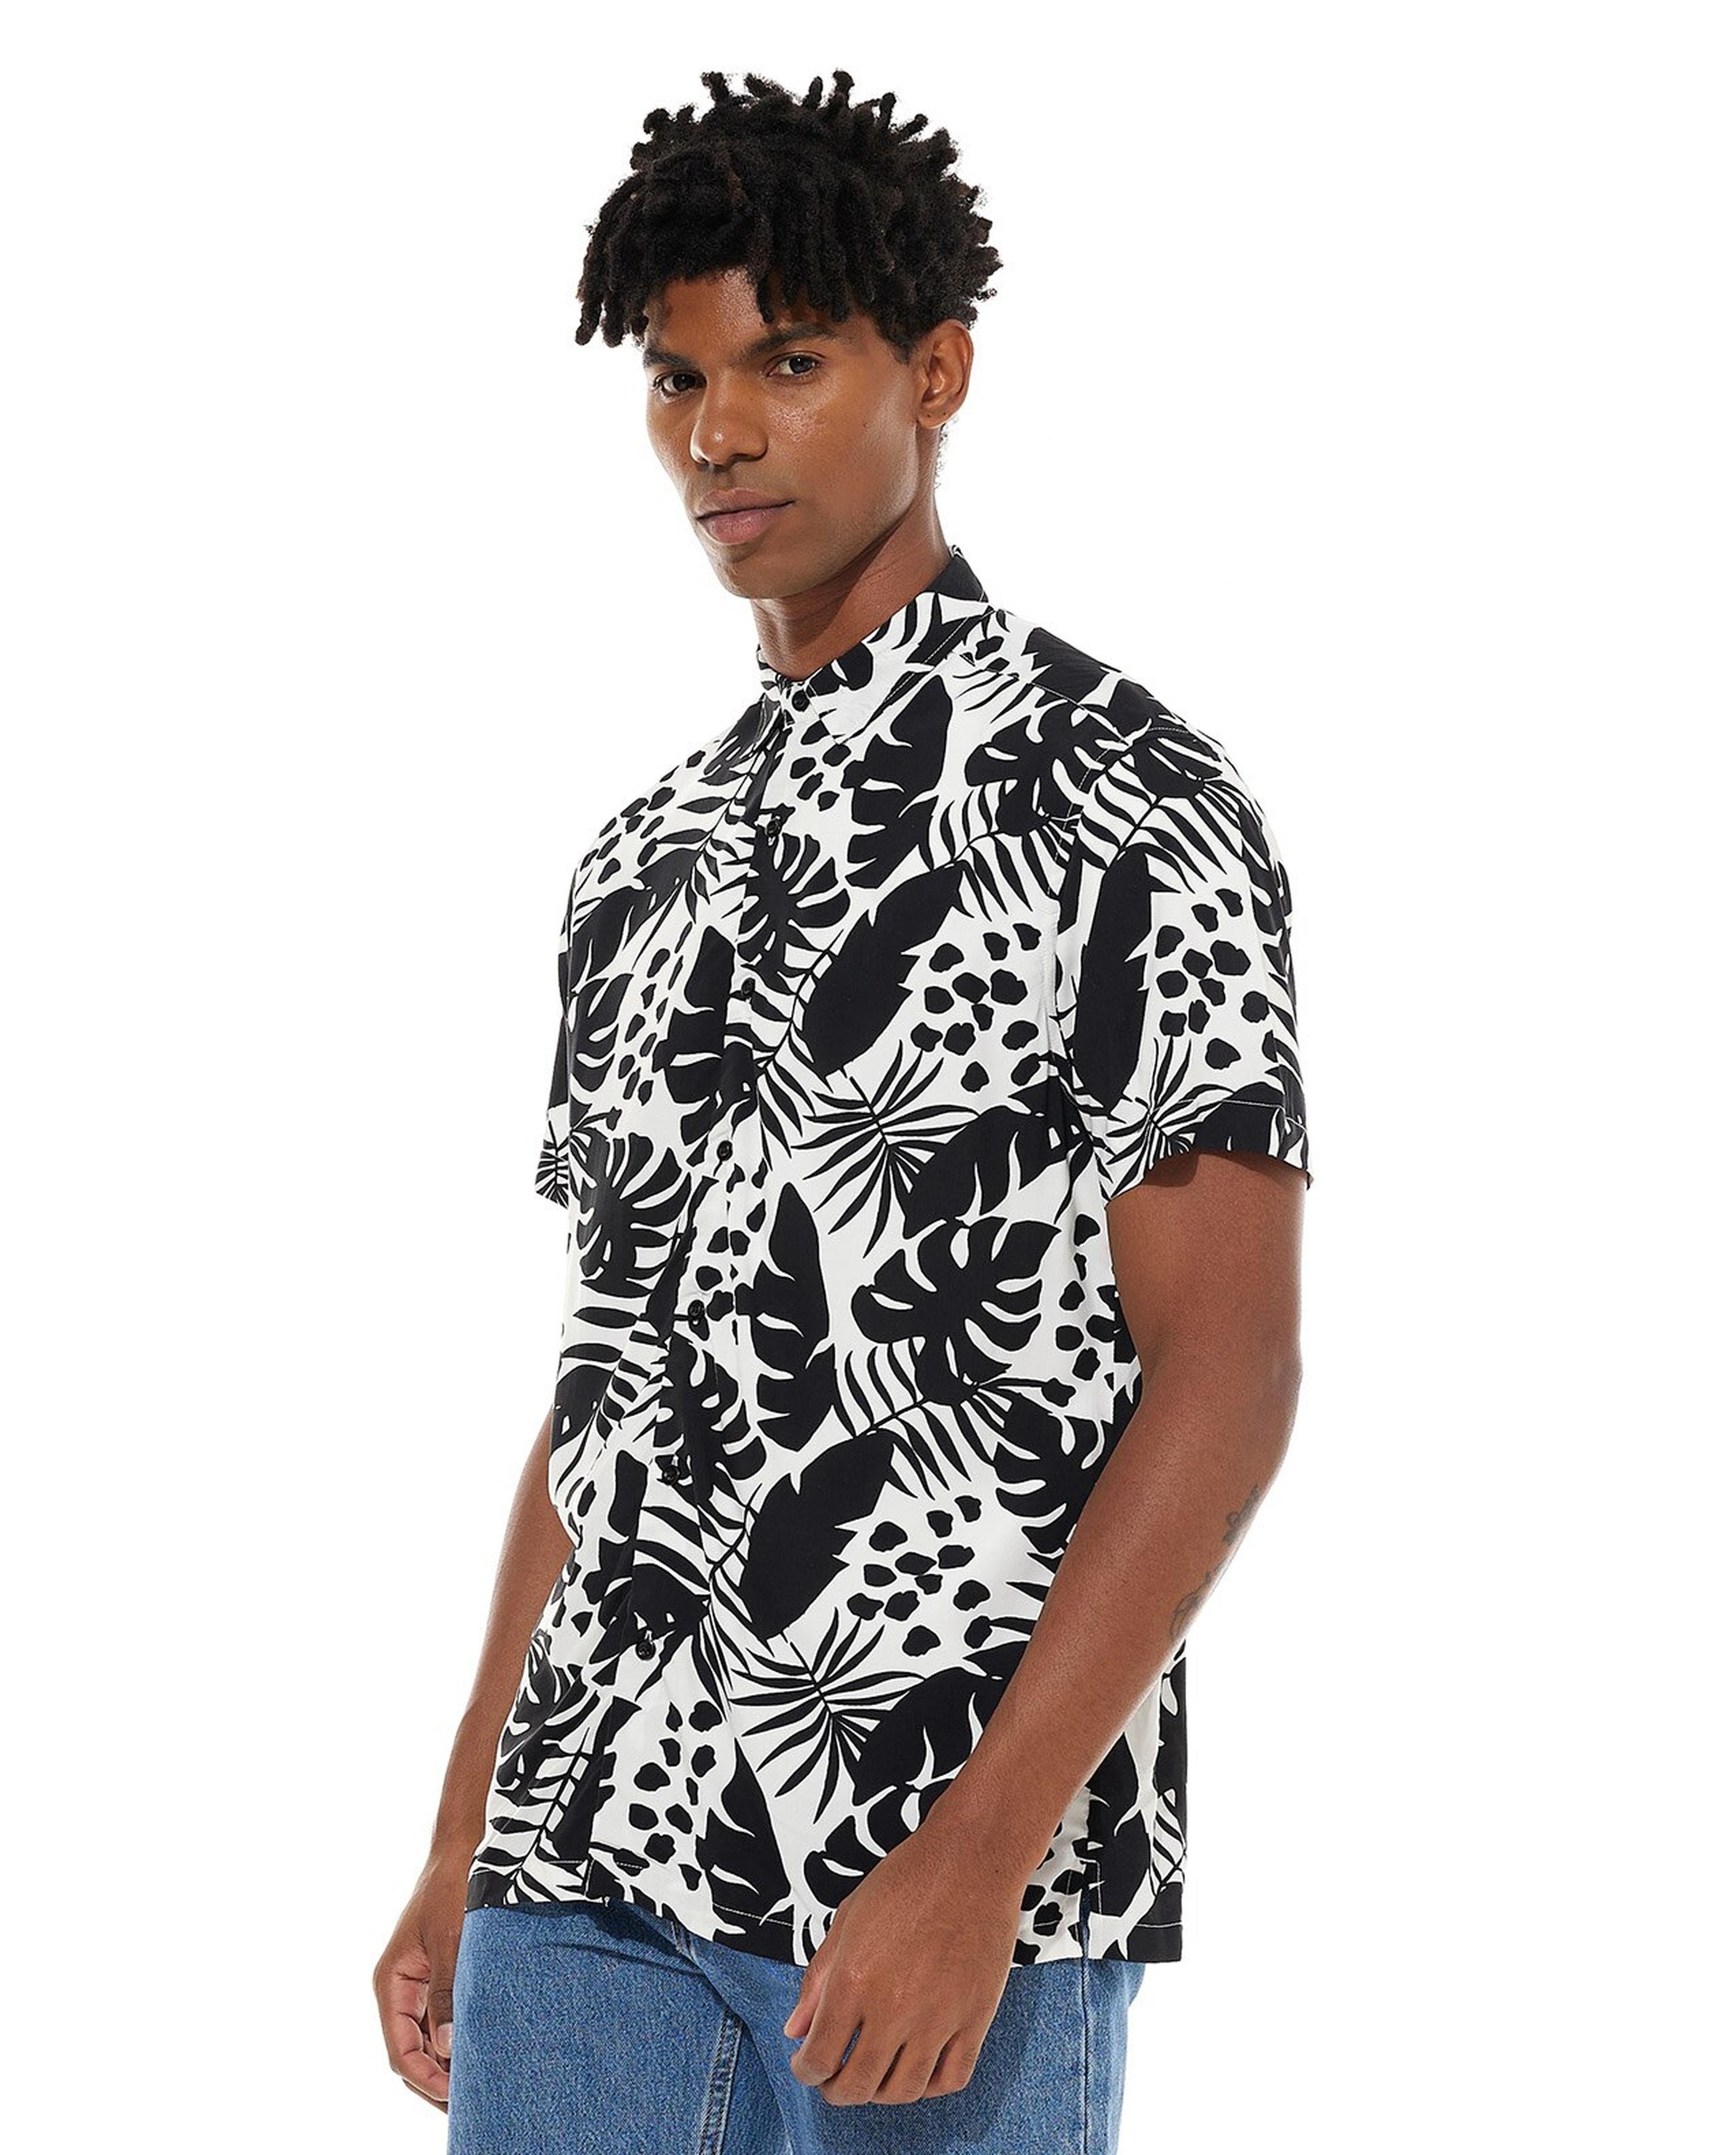 All Over Print Shirt with Classic Collar and Short Sleeves